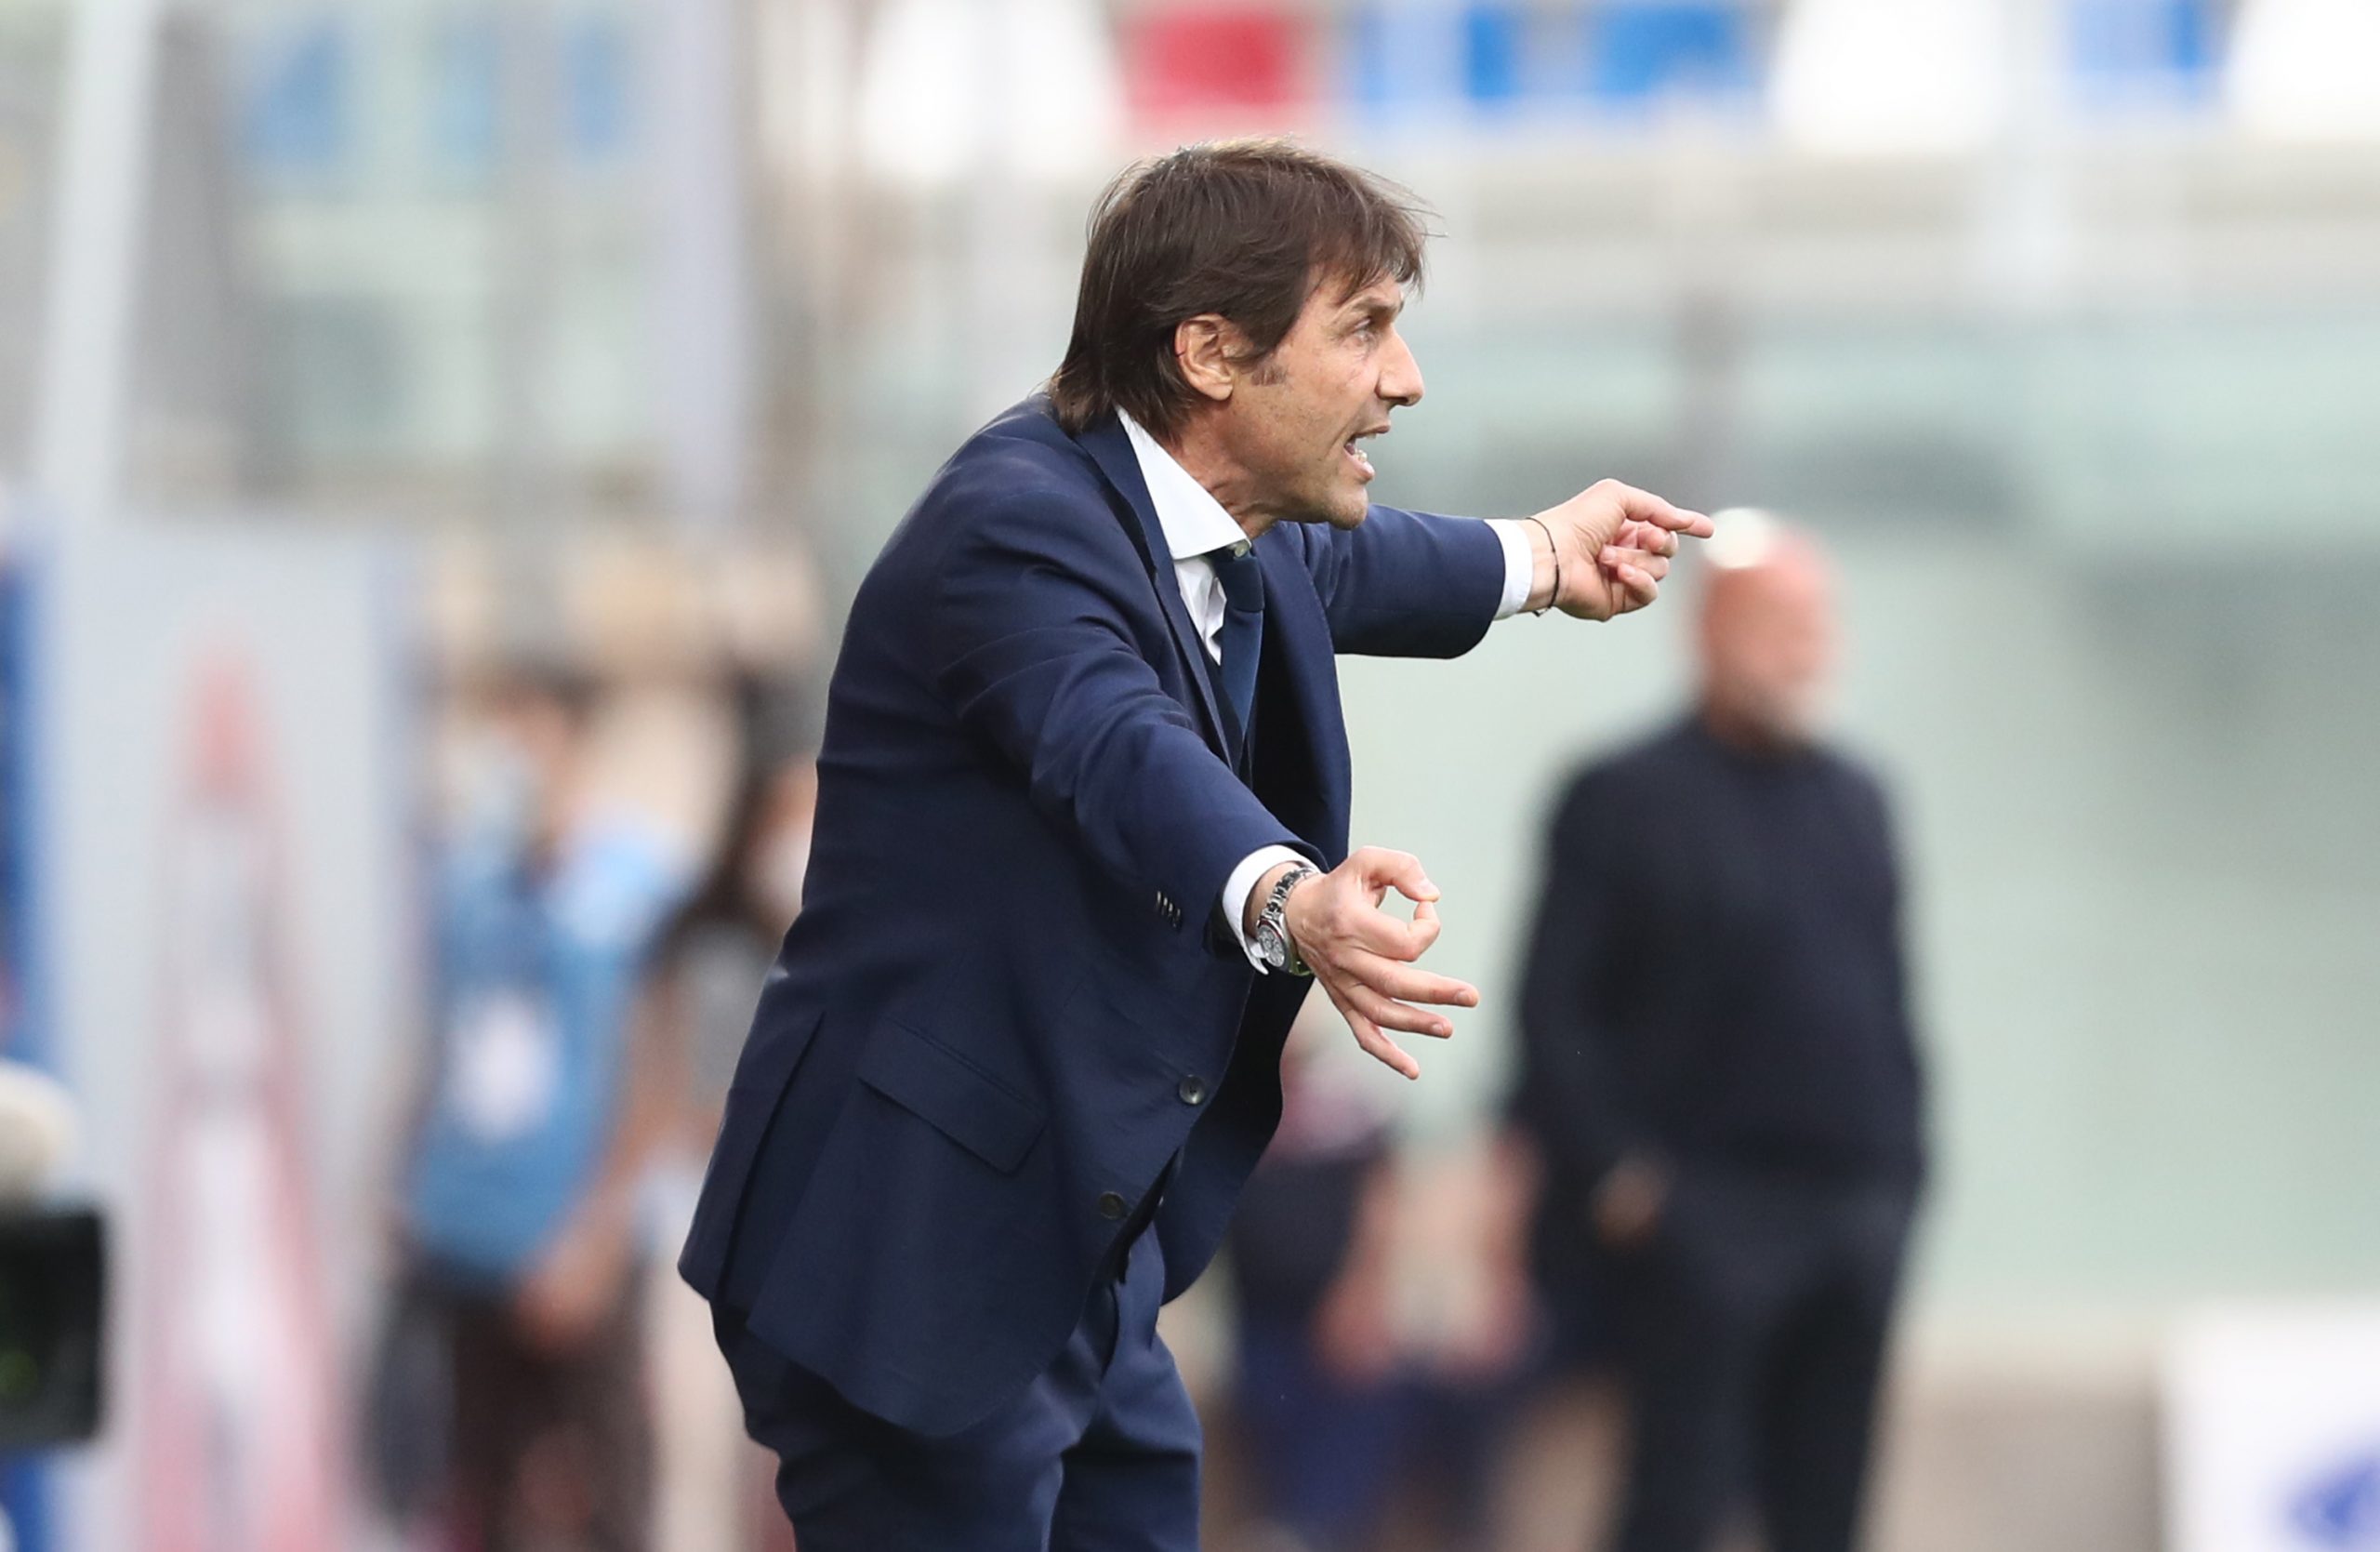 Antonio Conte is thought to be open to discussing a move to Manchester United. (Photo by Maurizio Lagana/Getty Images)